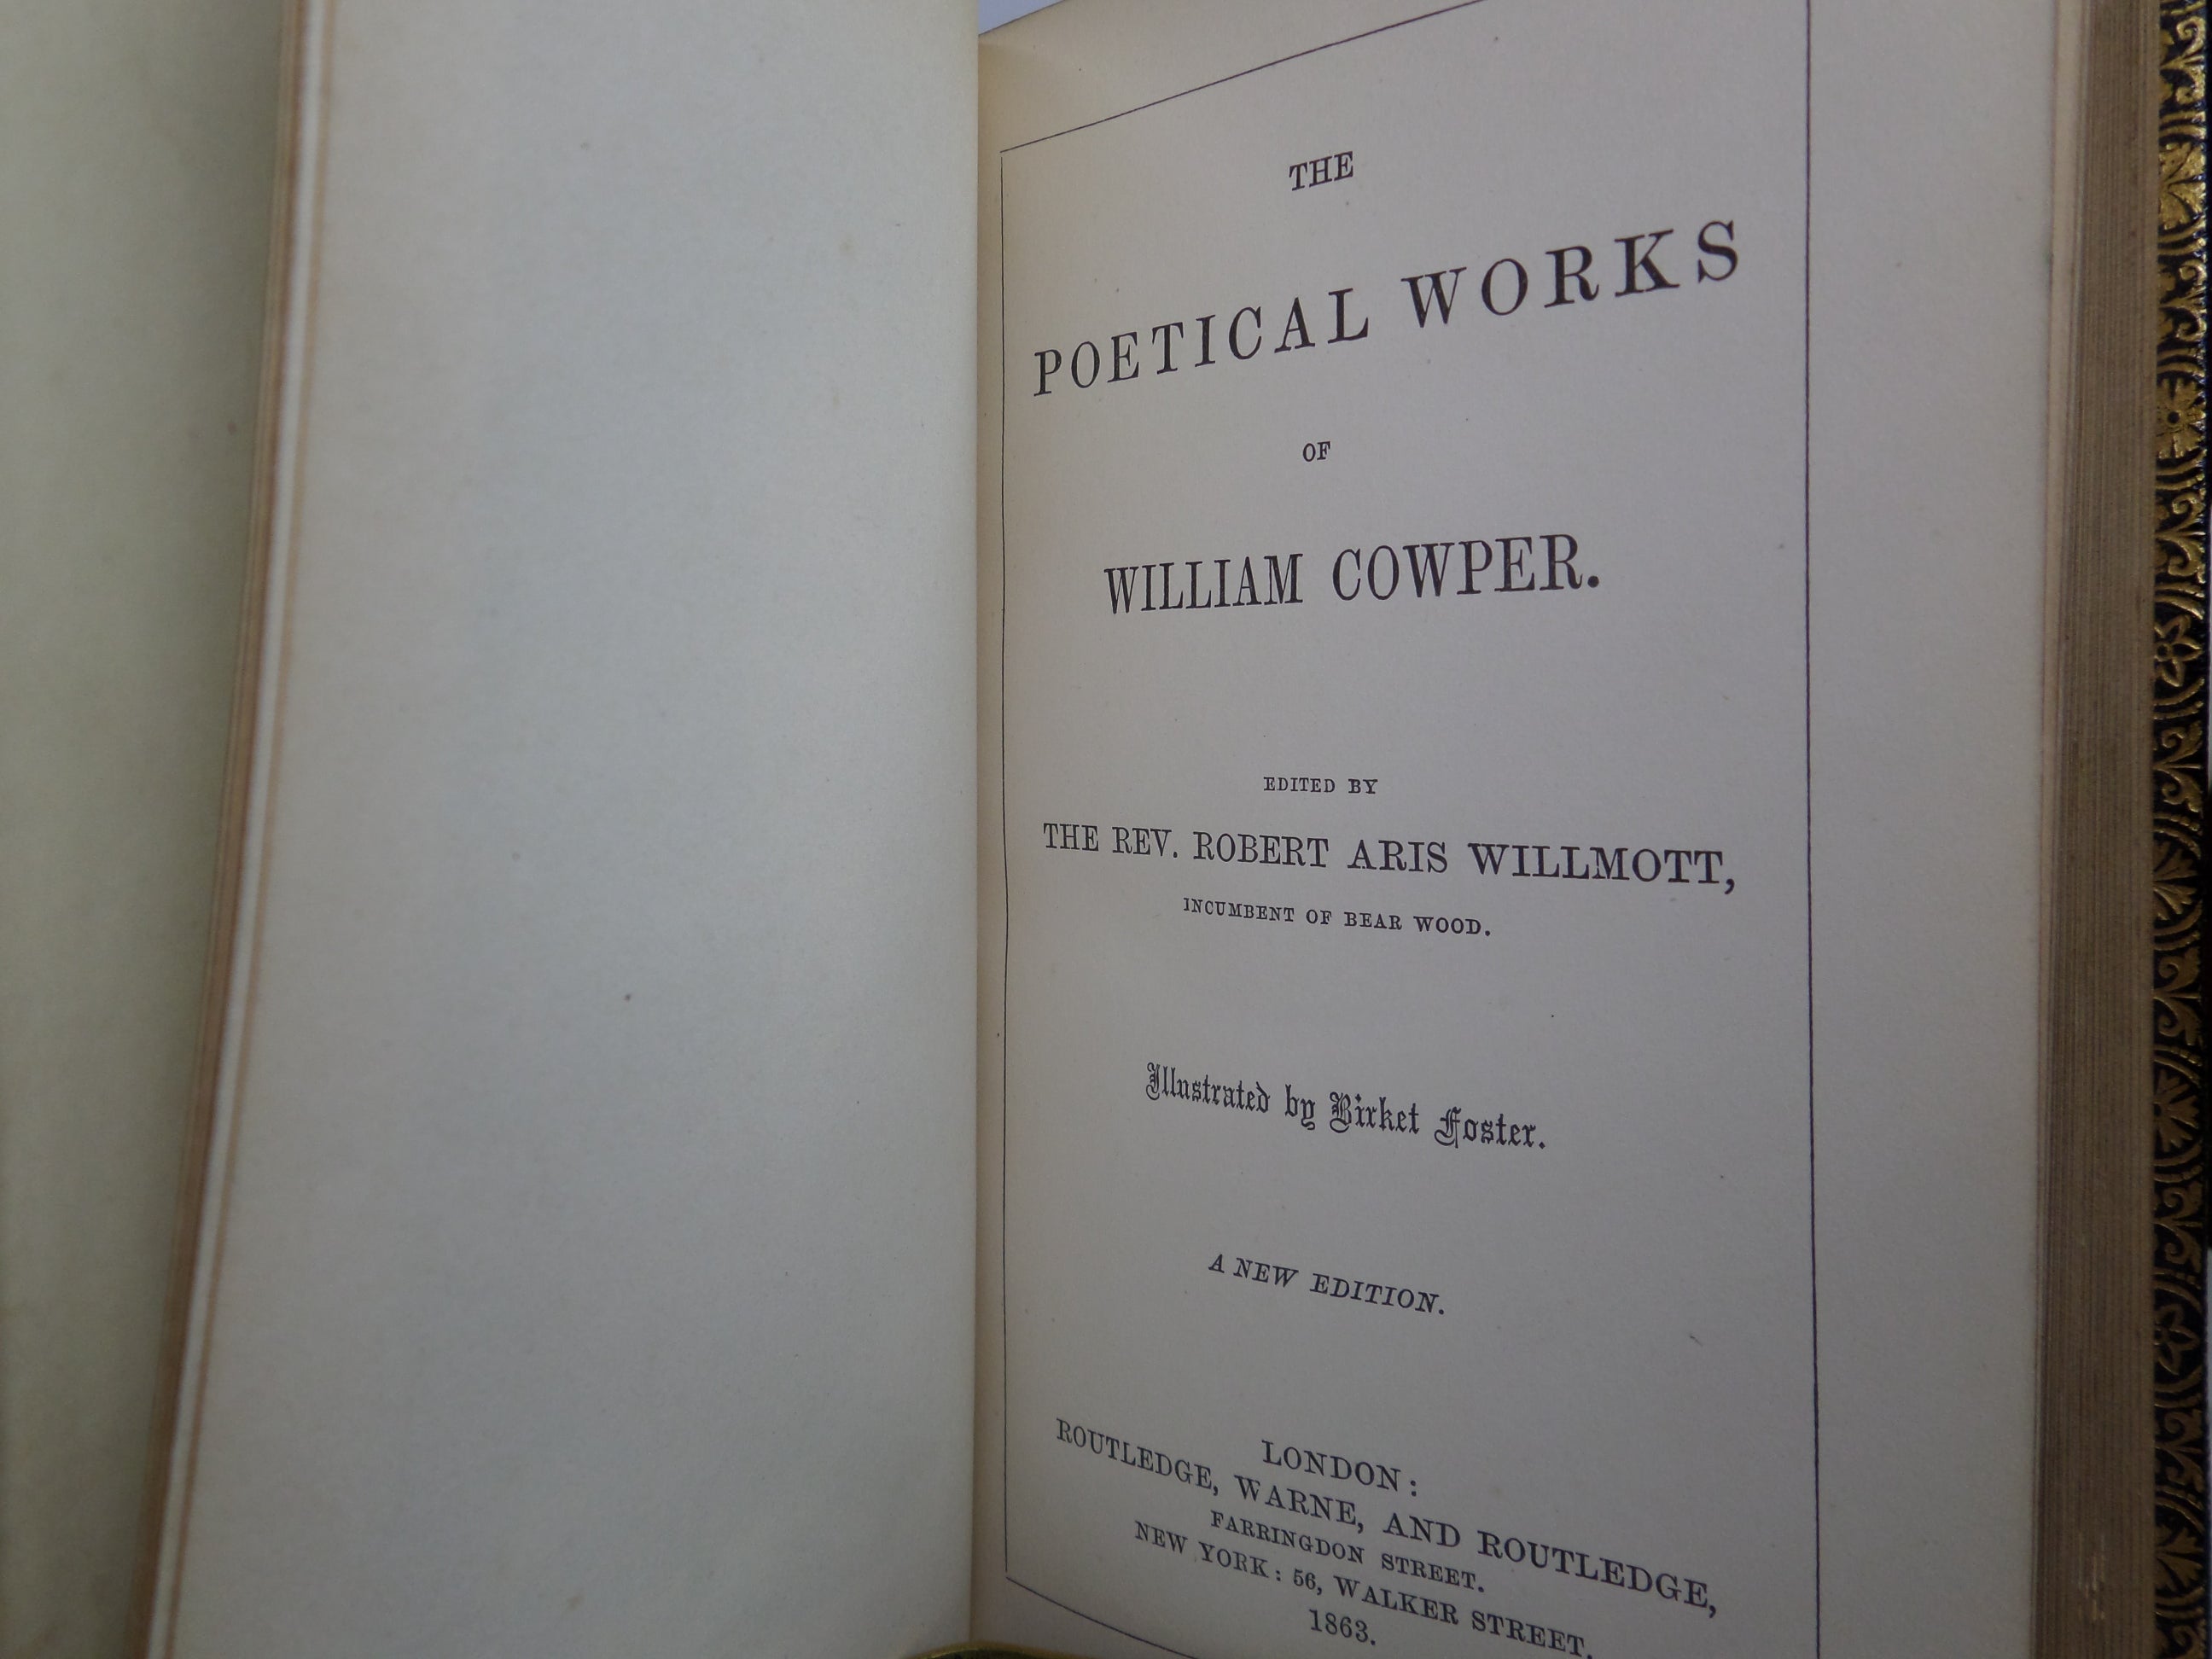 THE POETICAL WORKS OF WILLIAM COWPER 1863 FINE BINDING, ILLUSTRATED